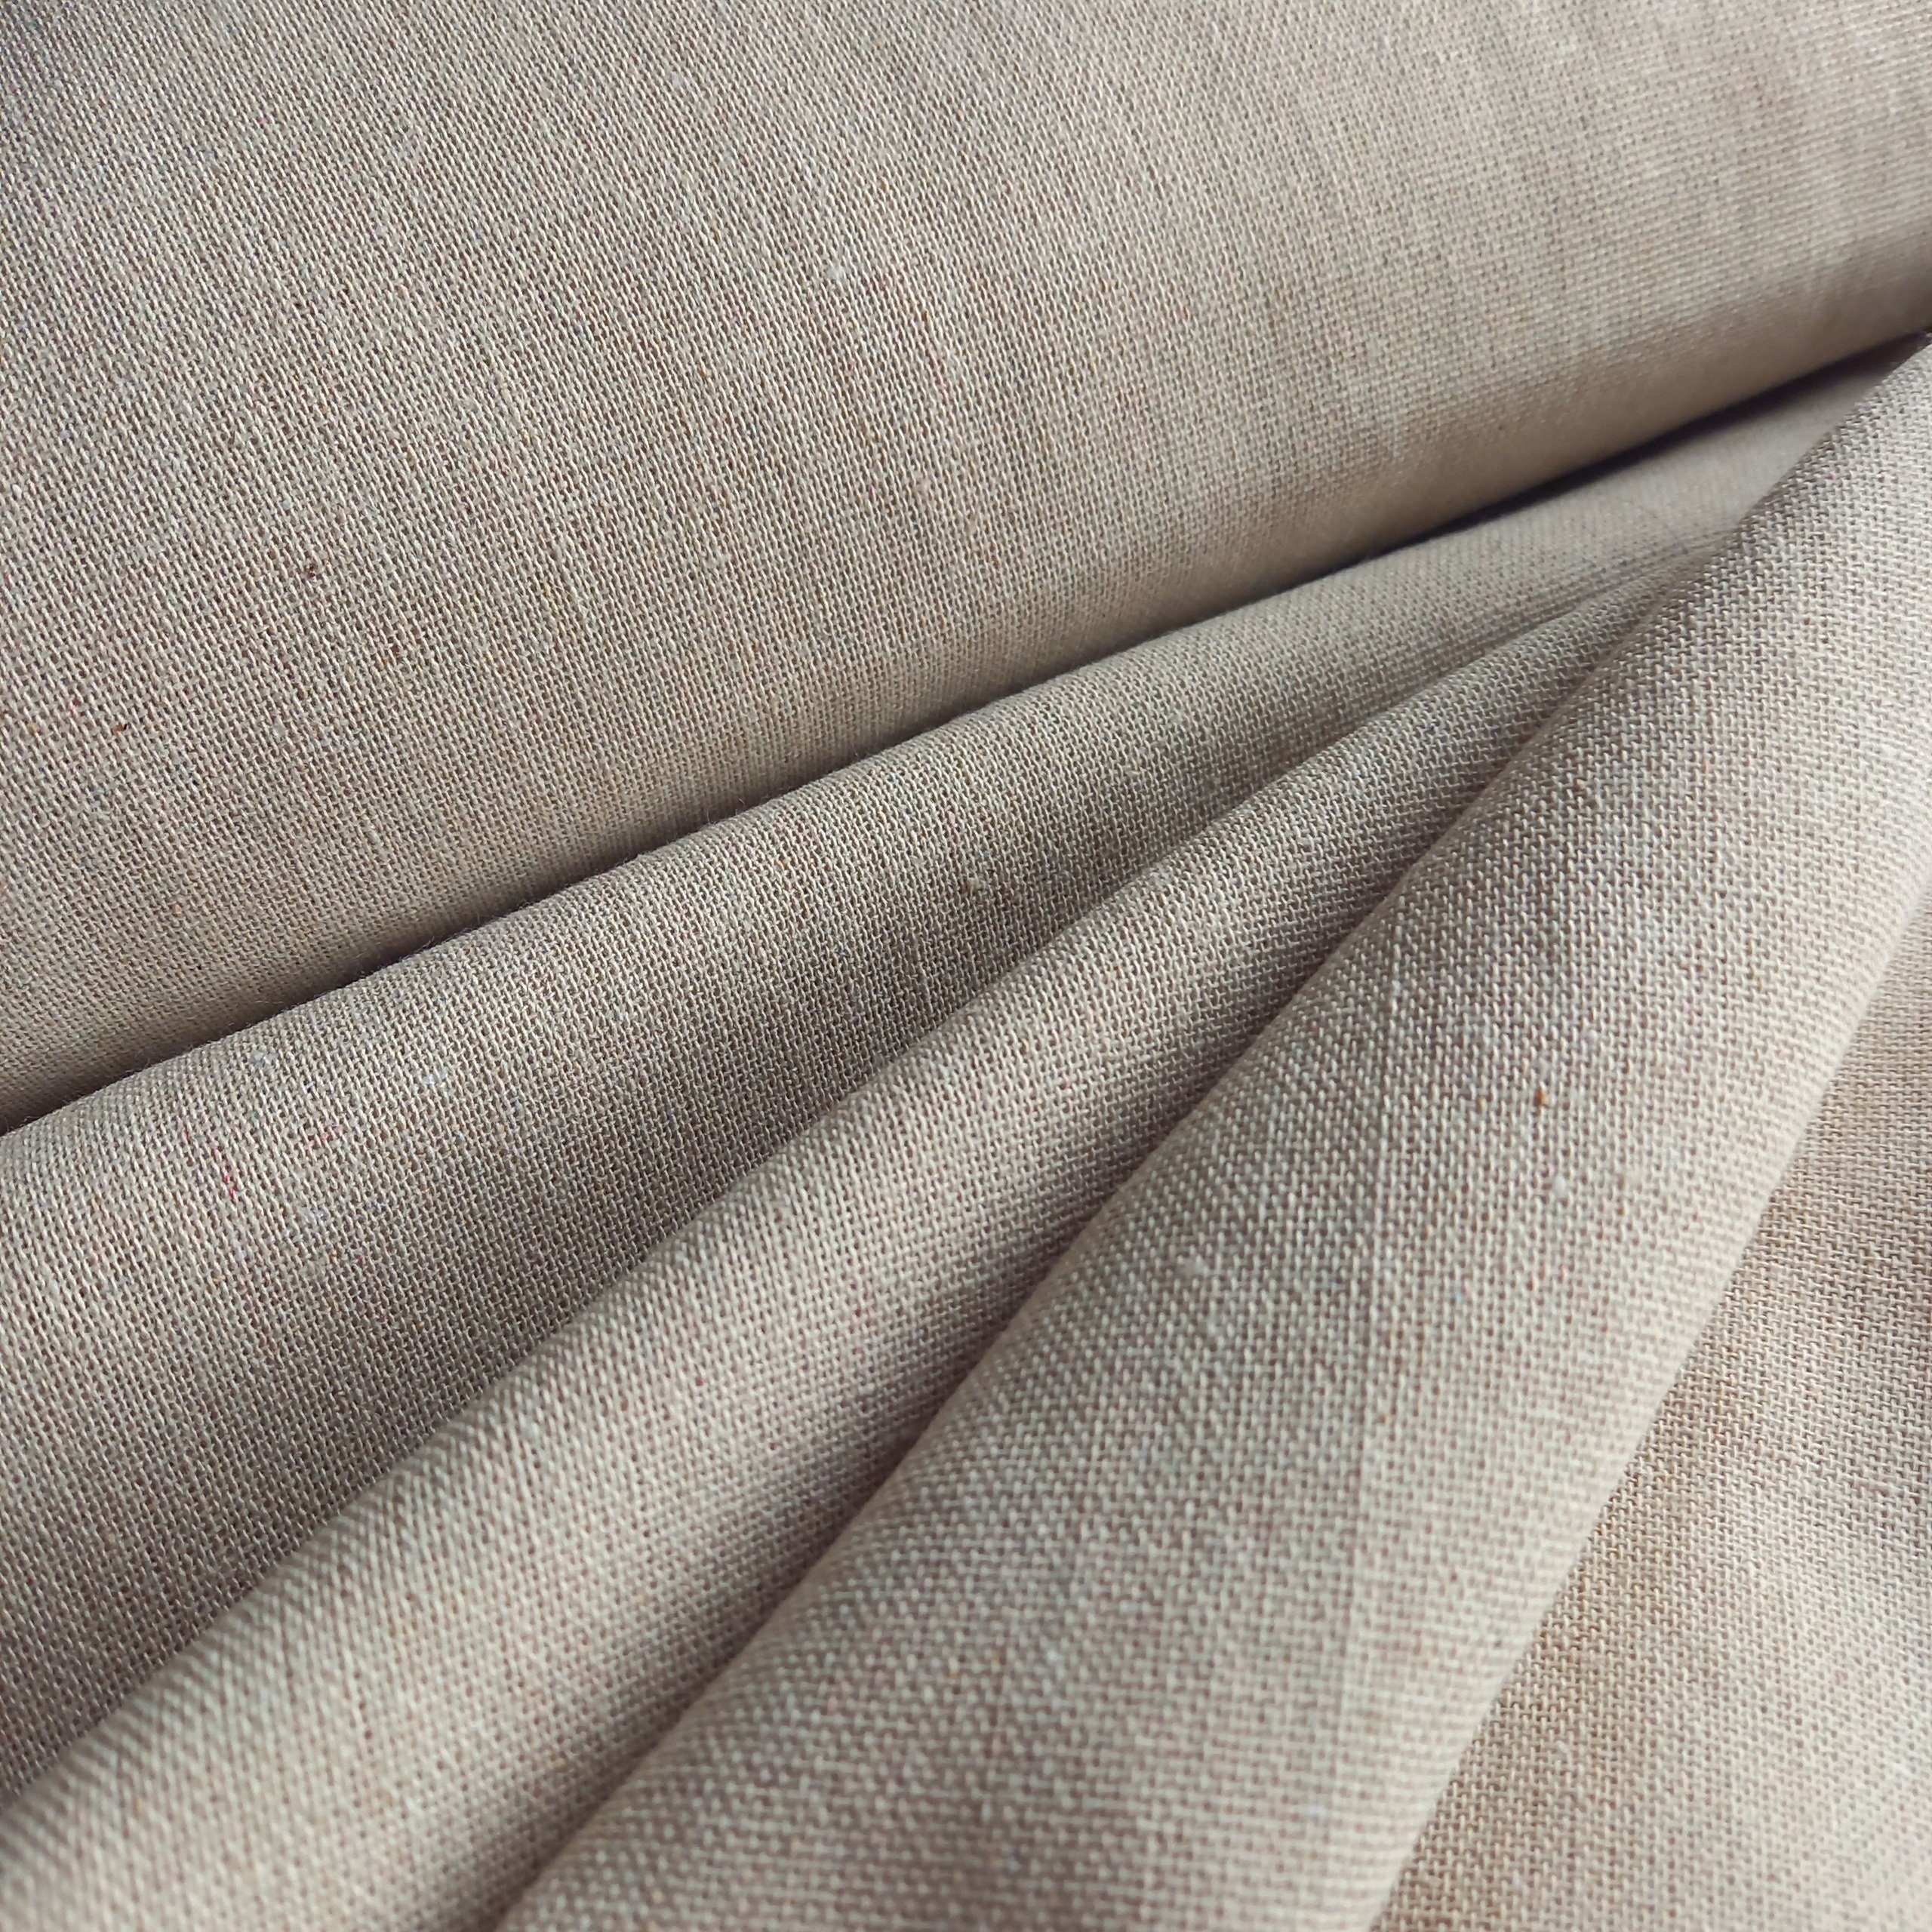 Monk's Cloth 8 Ct 4x4 Weave Natural 60 Wide Cotton Fabric by the Yard  (9071M-1E) 